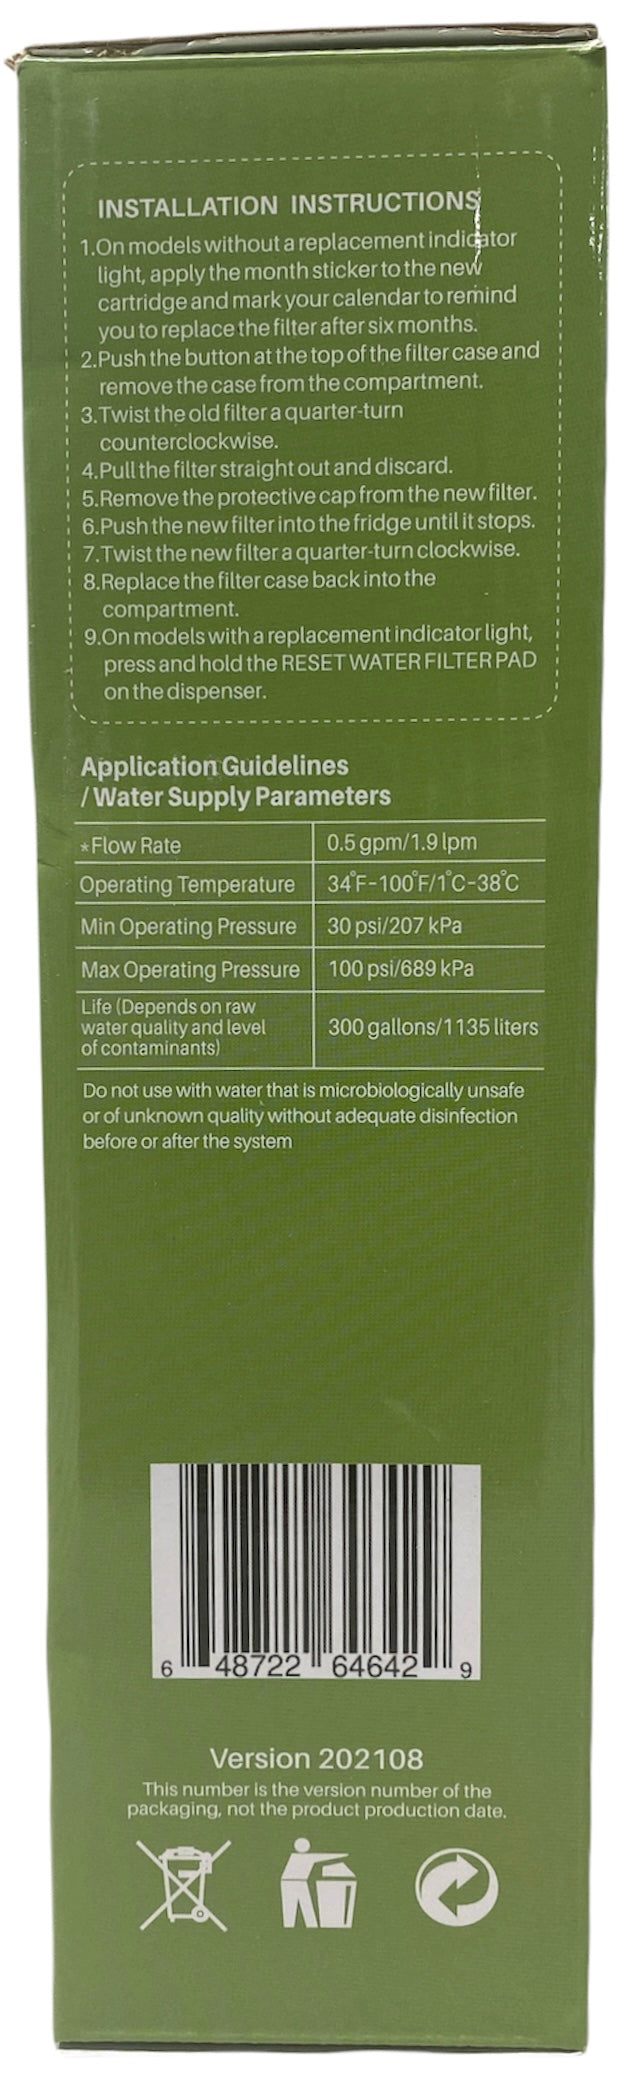 RWF2700A Refrigerator Water Filter IAPMO Certified Replacement for Bosch 640565 ,EVOLFLTR10, AP3961137, WHKFR-PLUS, WHKF-R-PLUS, WHCF-IMTOS, WHCF-IMPLUS, Refrigerator Water Filter